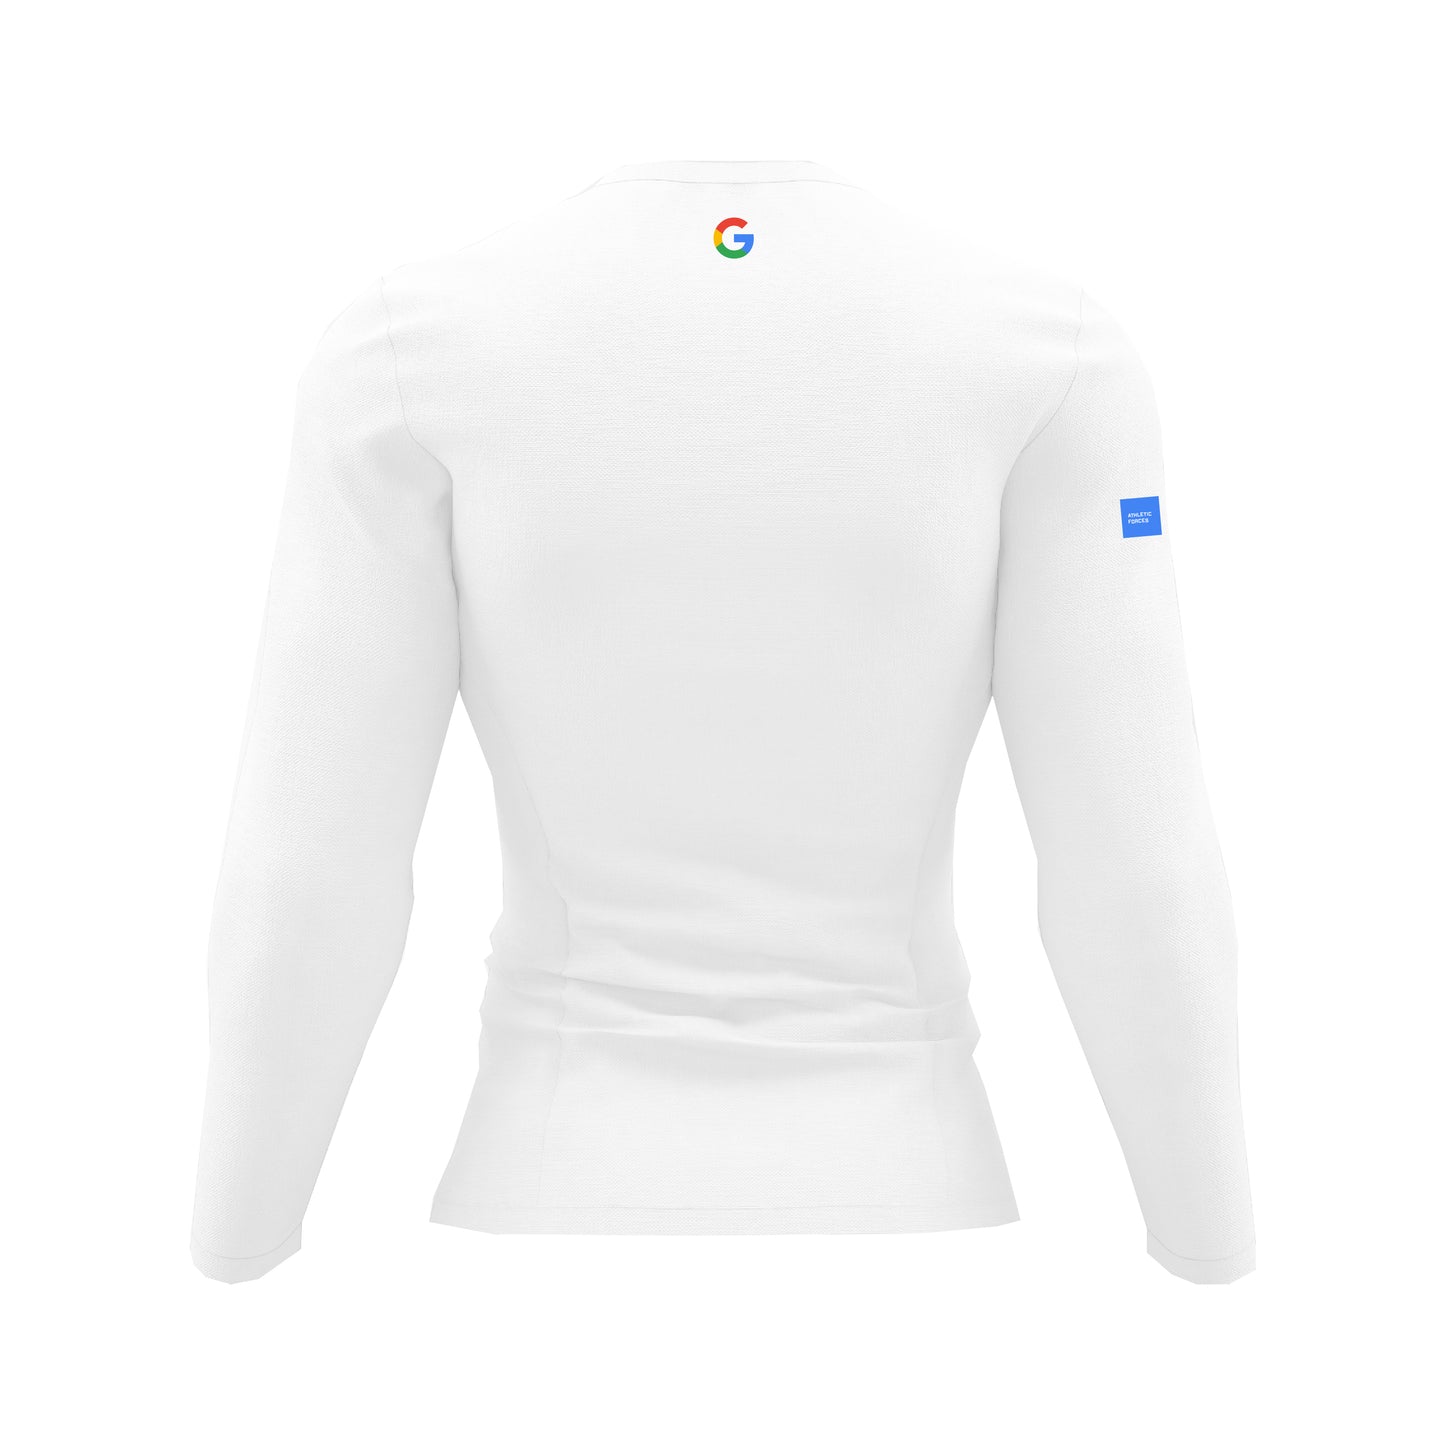 Google - Robot Force ® Sweatshirt by Athletic Forces -  Model 2